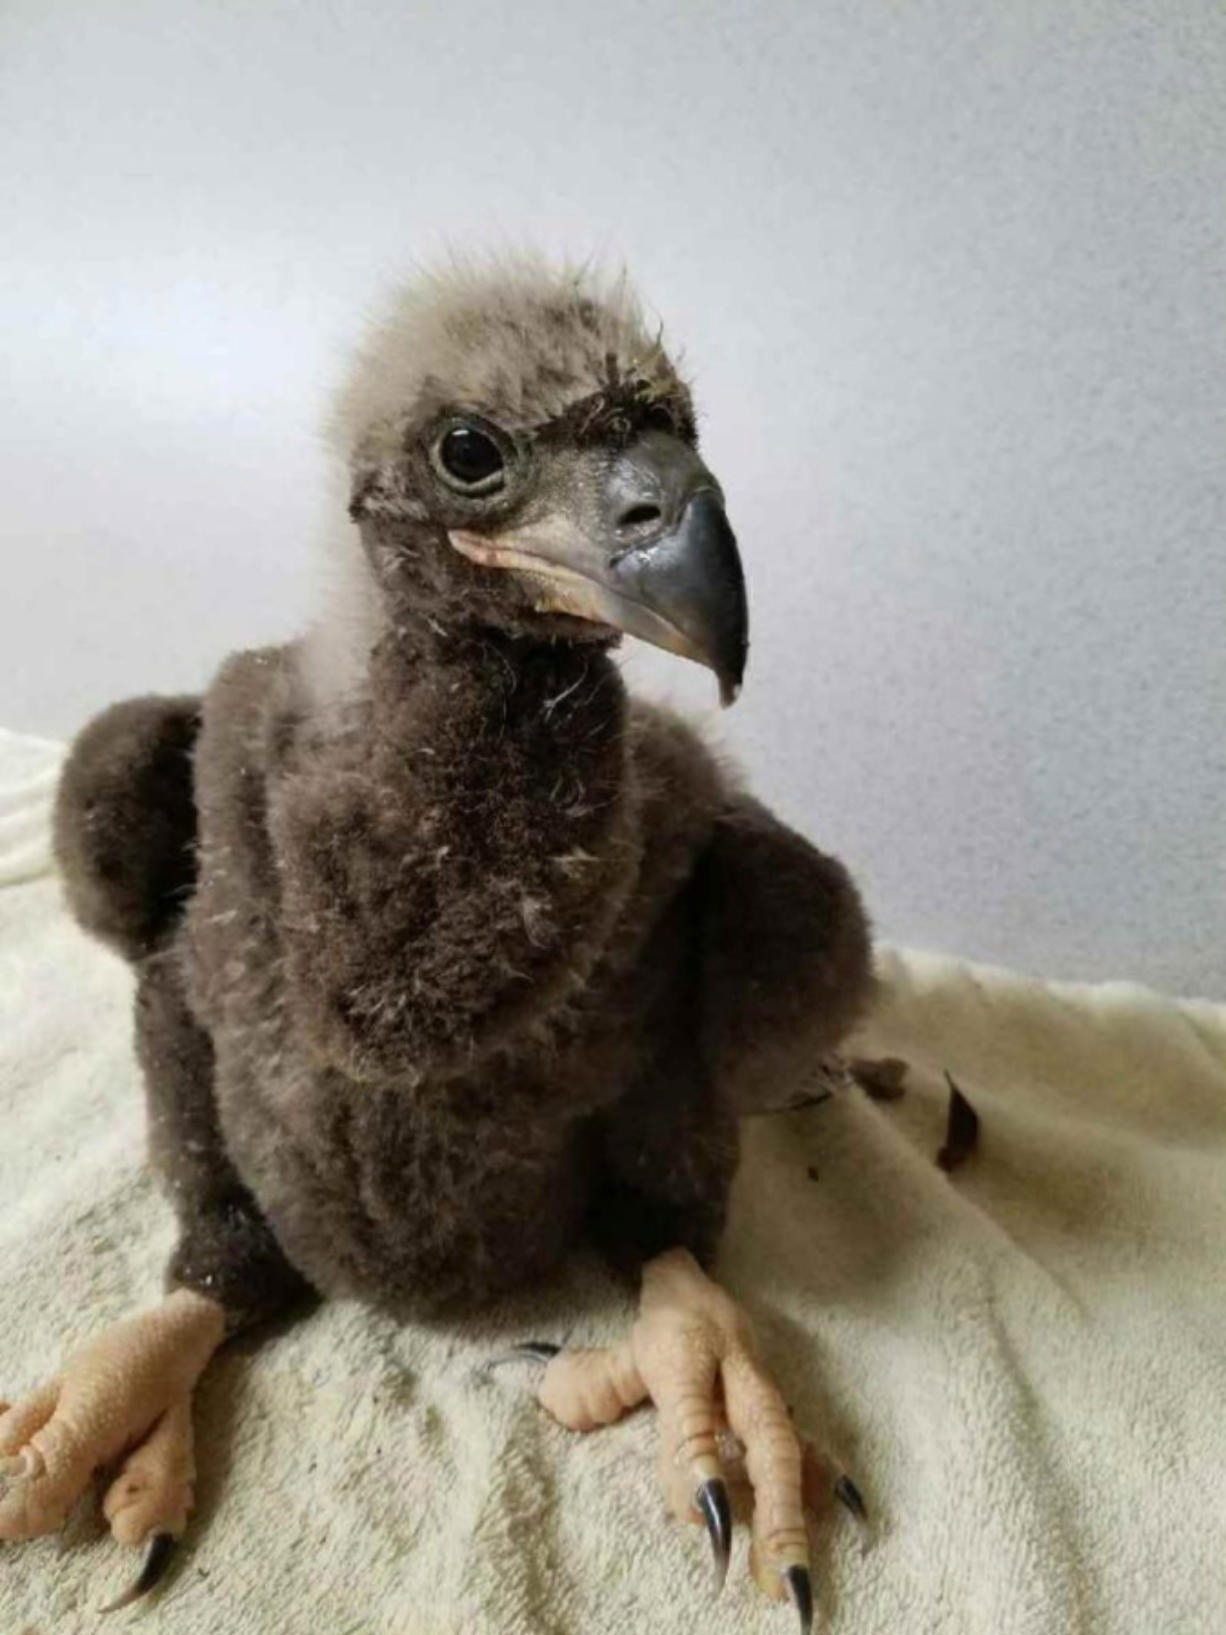 DC4, a baby eaglet, after being rescued from a nest after it got its foot caught in a tree limb. It appears not to have broken any bones.